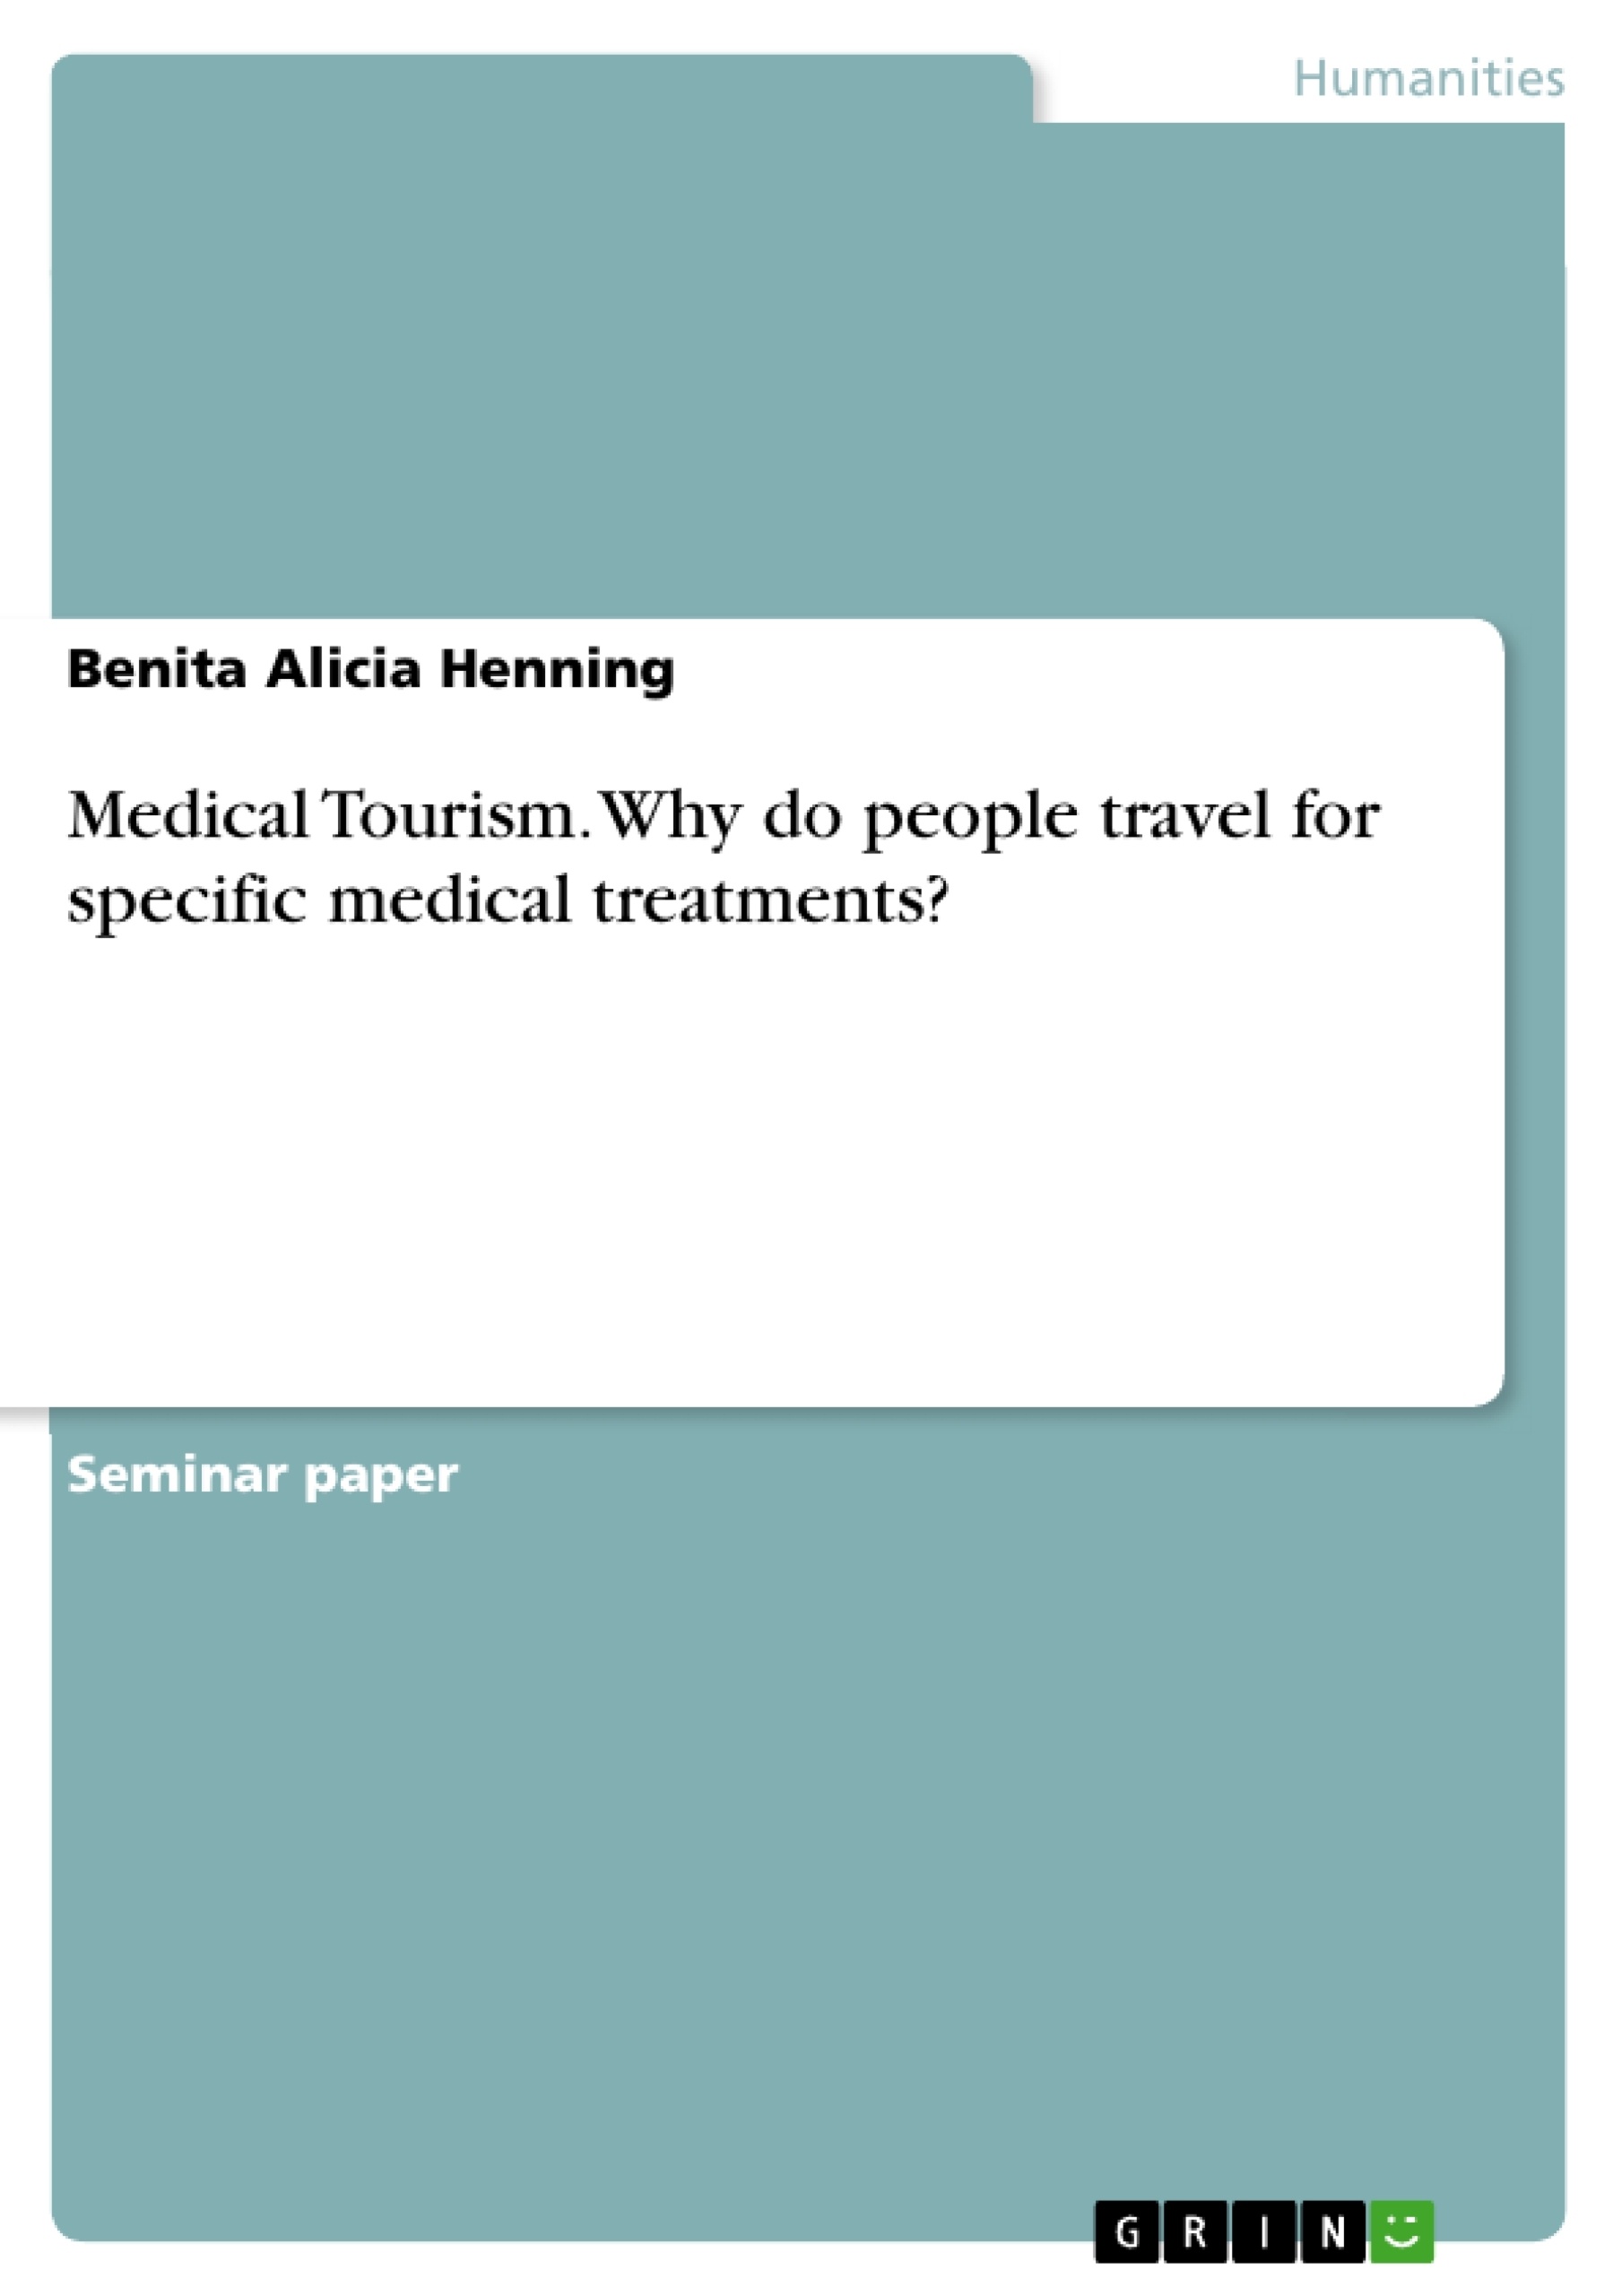 Title: Medical Tourism. Why do people travel for specific medical treatments?